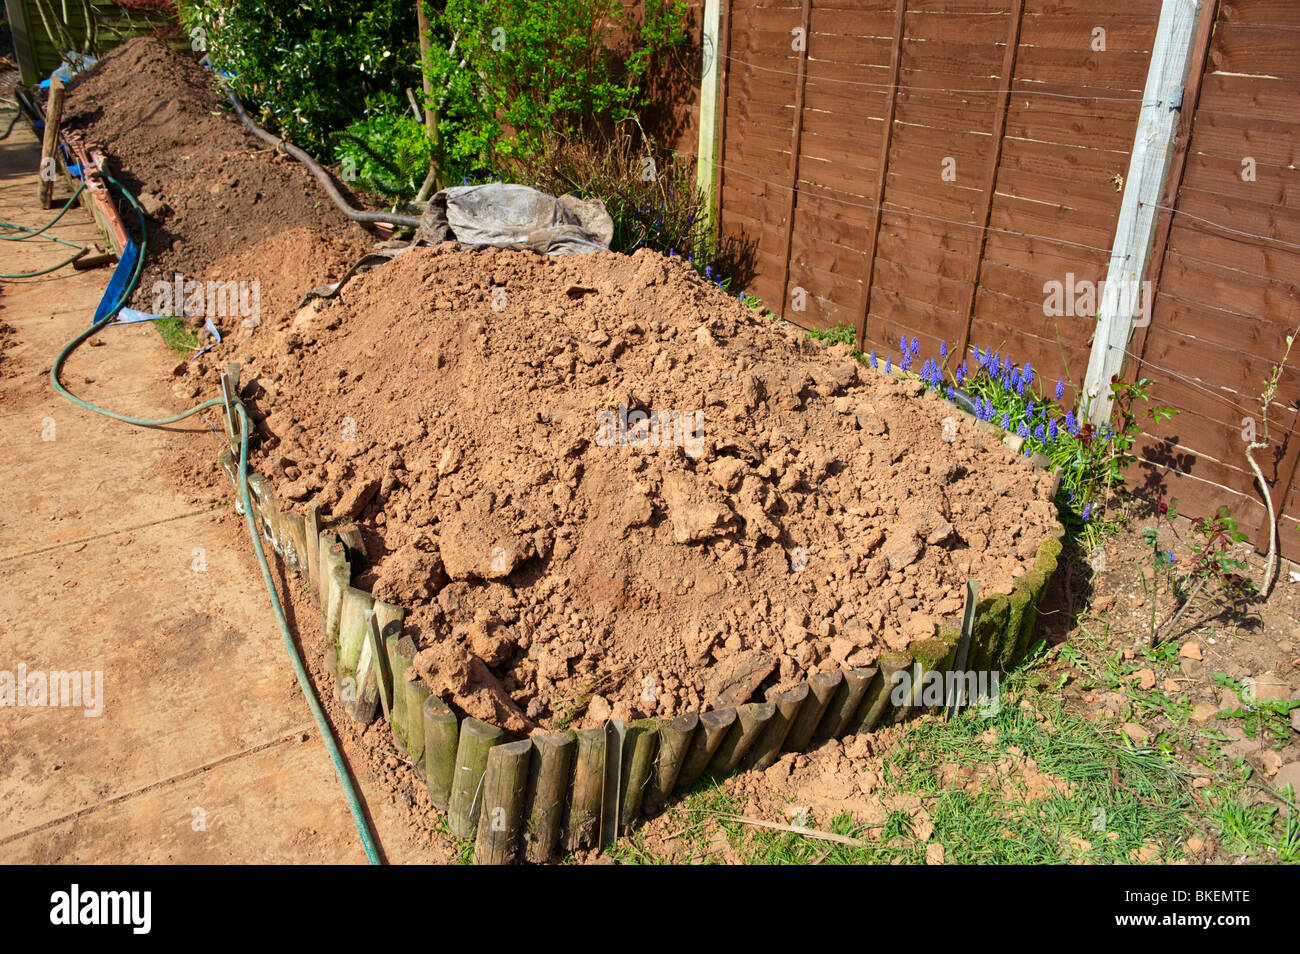 Soil in garden held in place by wooden barrier awaiting removal Stock Photo